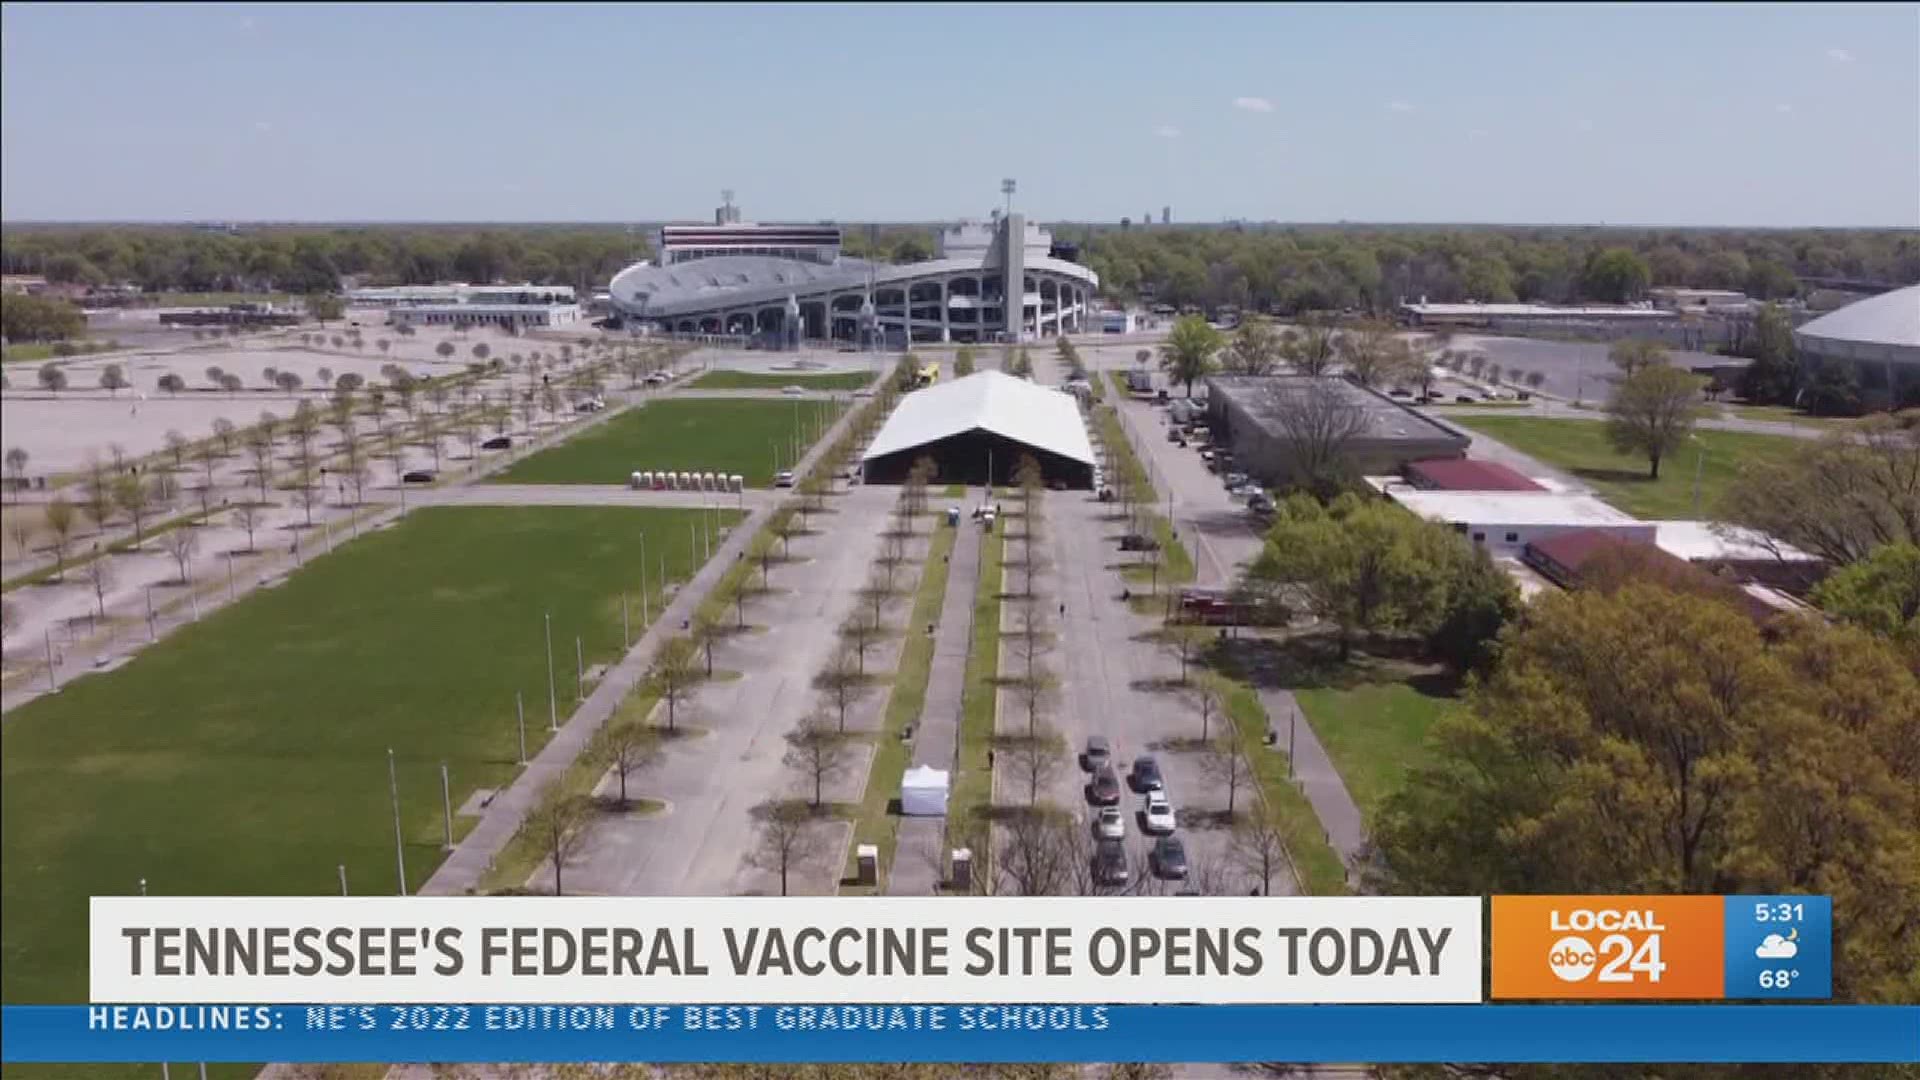 The new site doubles the daily vaccine output. It can vaccinate 21,000 people a week.